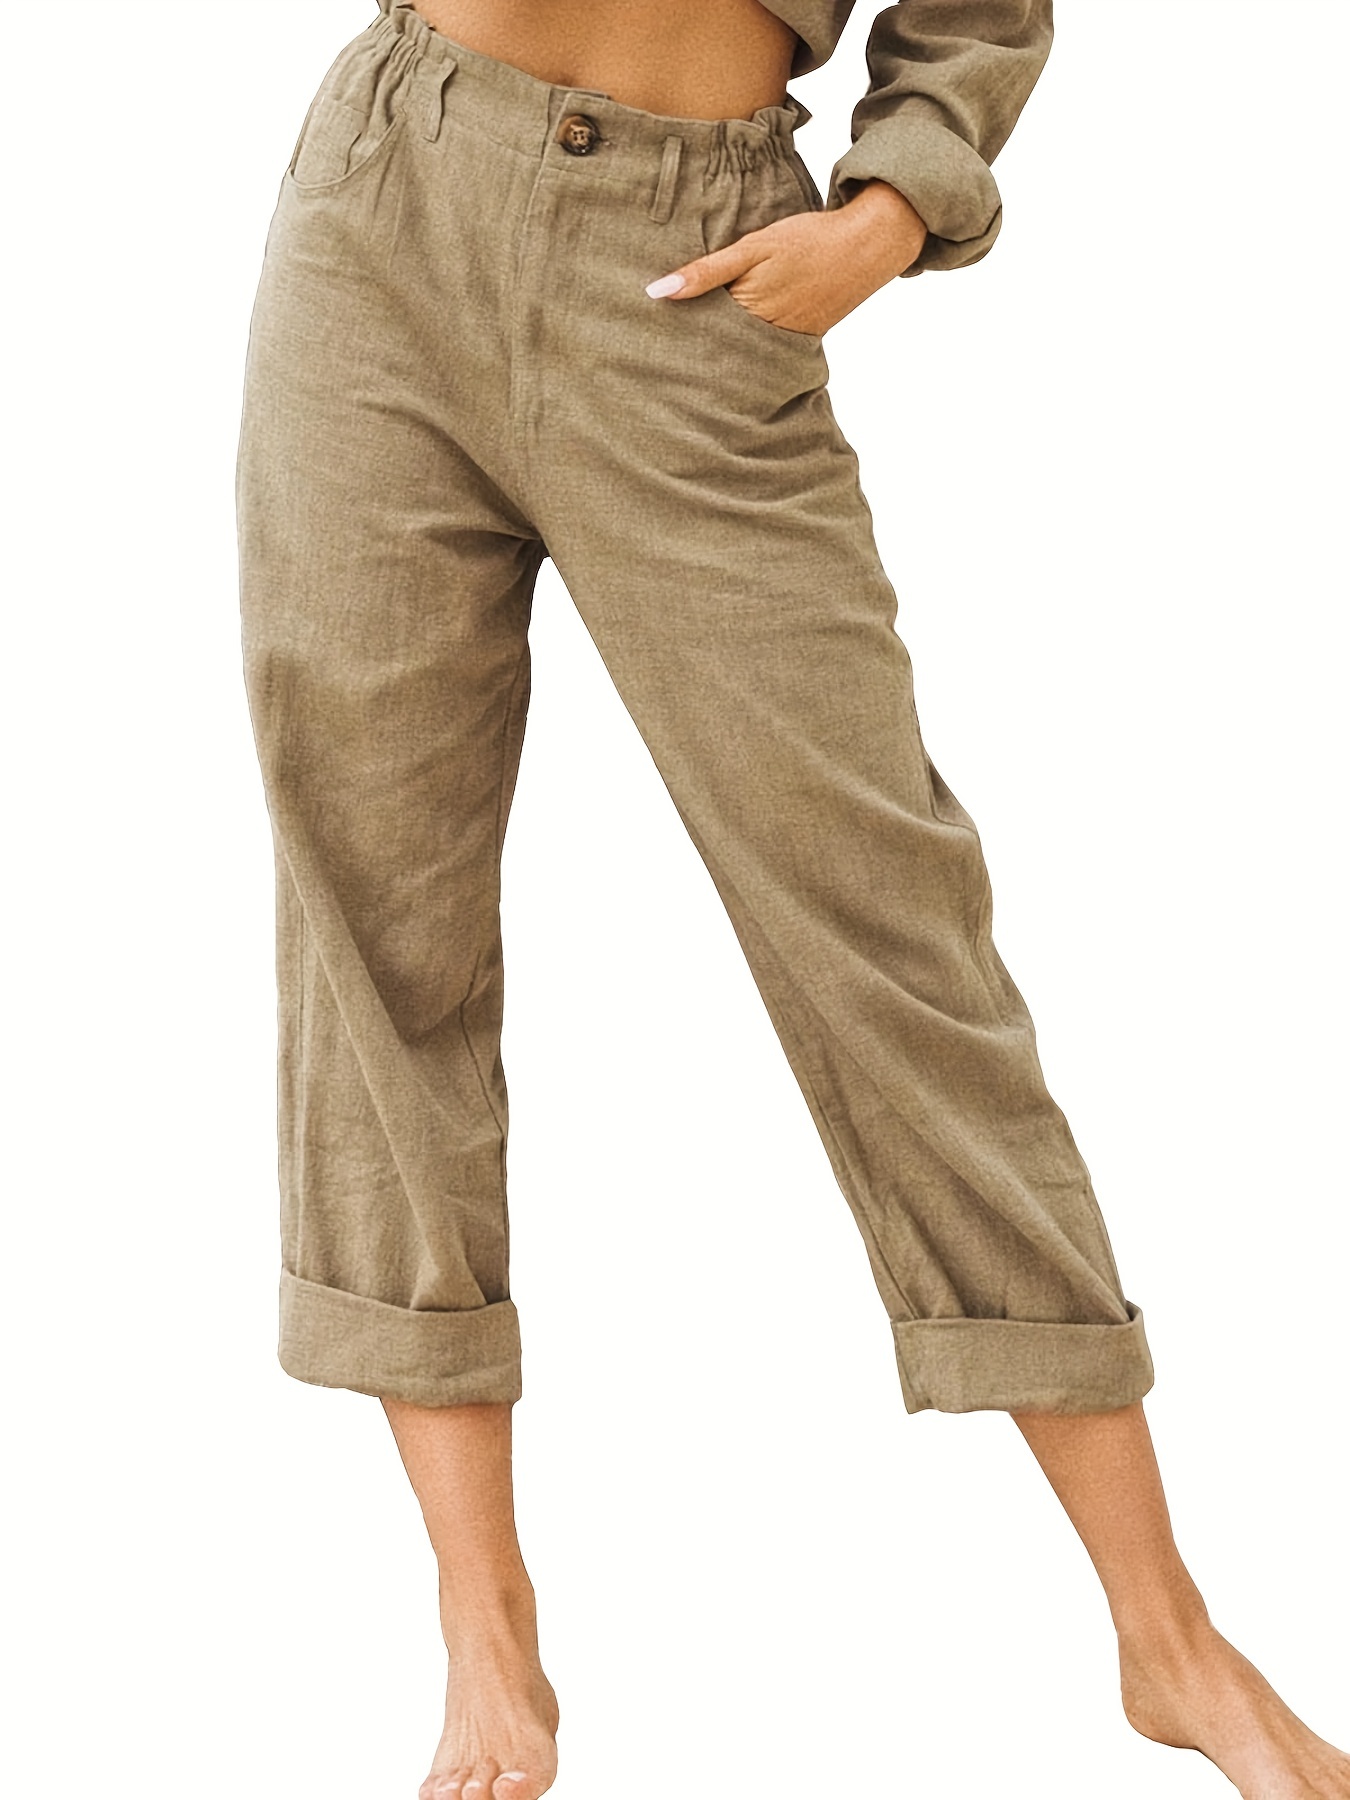 Womens Capri Pants for Summer Plus Size Casual Solid Color Comfy